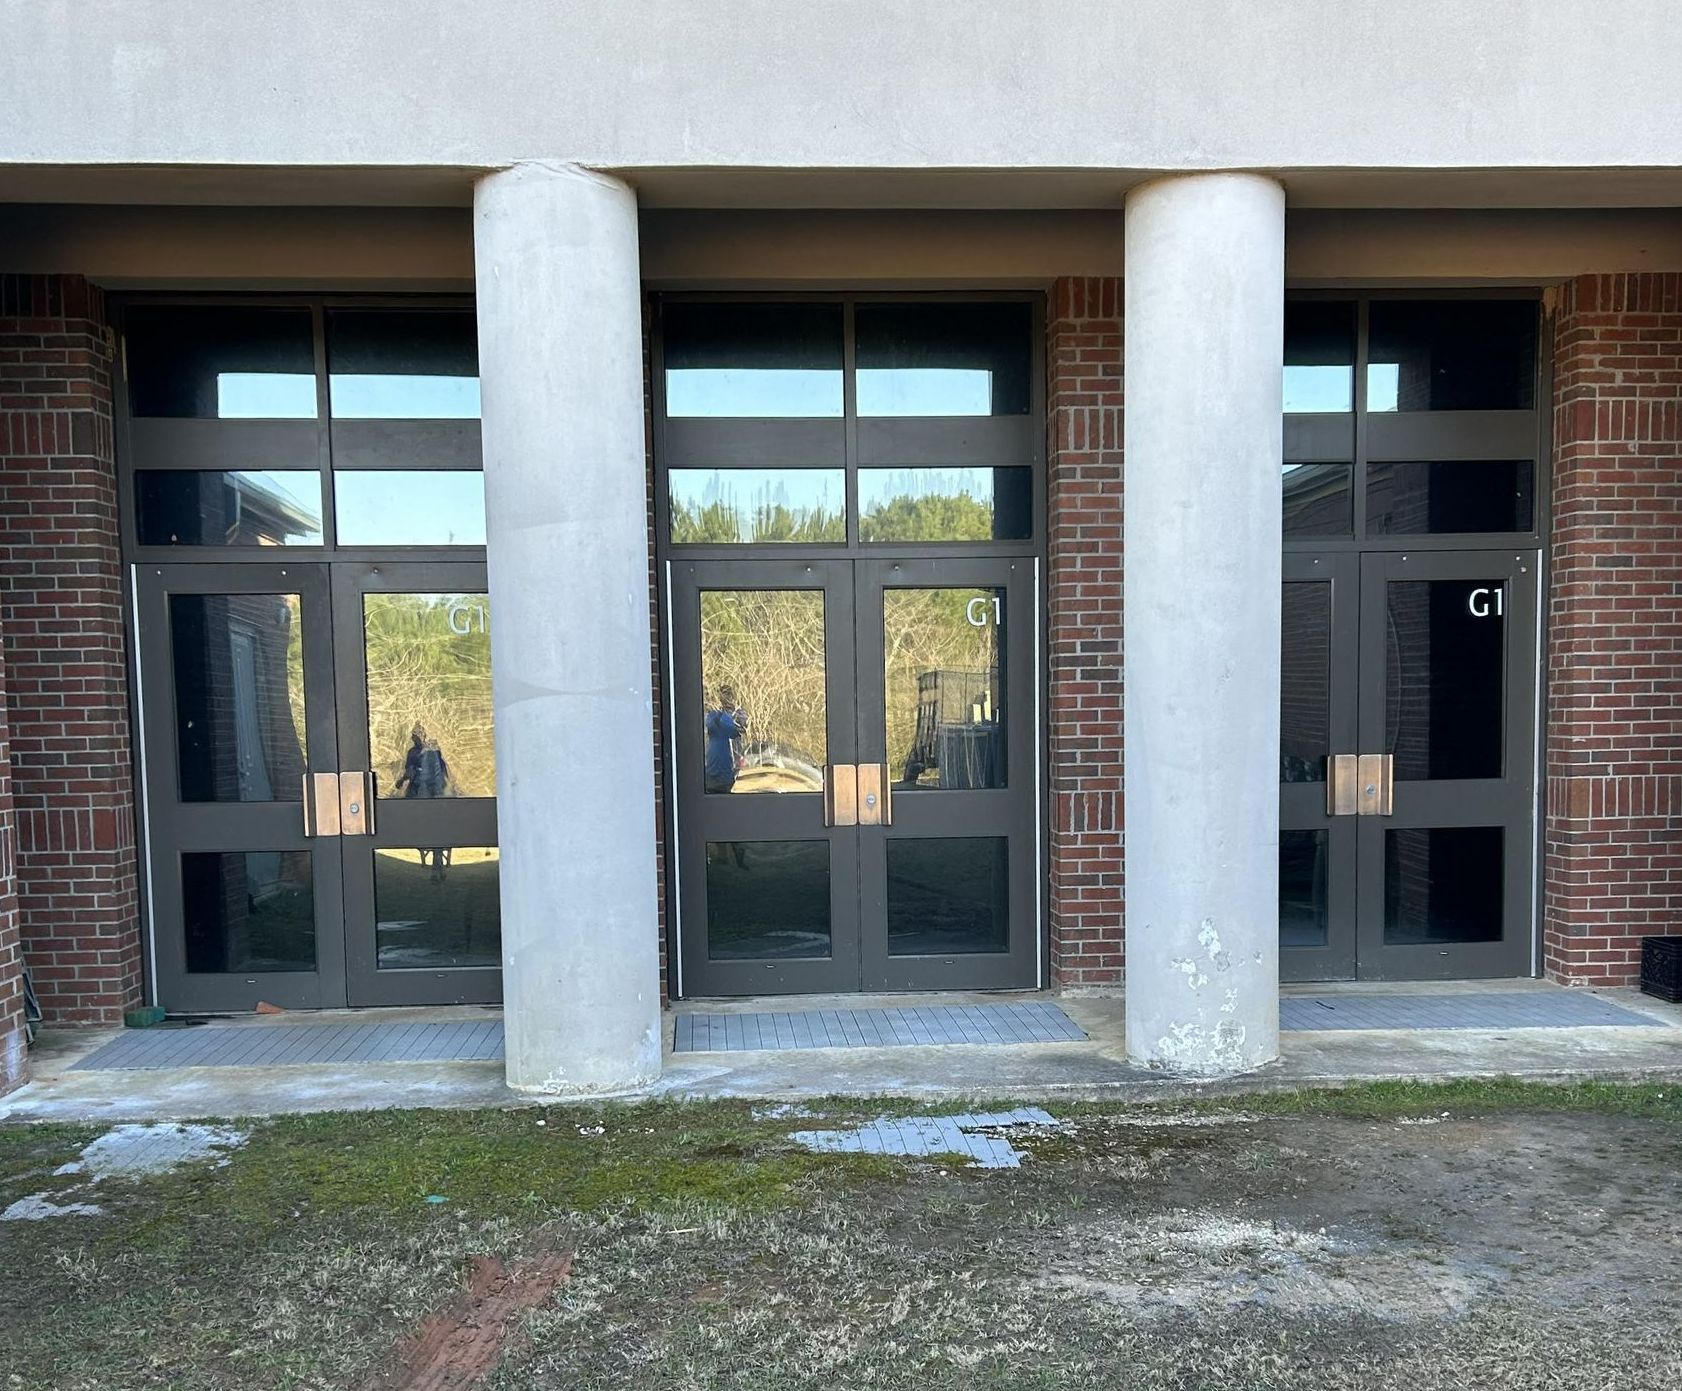 Beulah Elementary windows have been SPF Tinted blocking maximum Heat & Glare. Plus, safety features added to school.